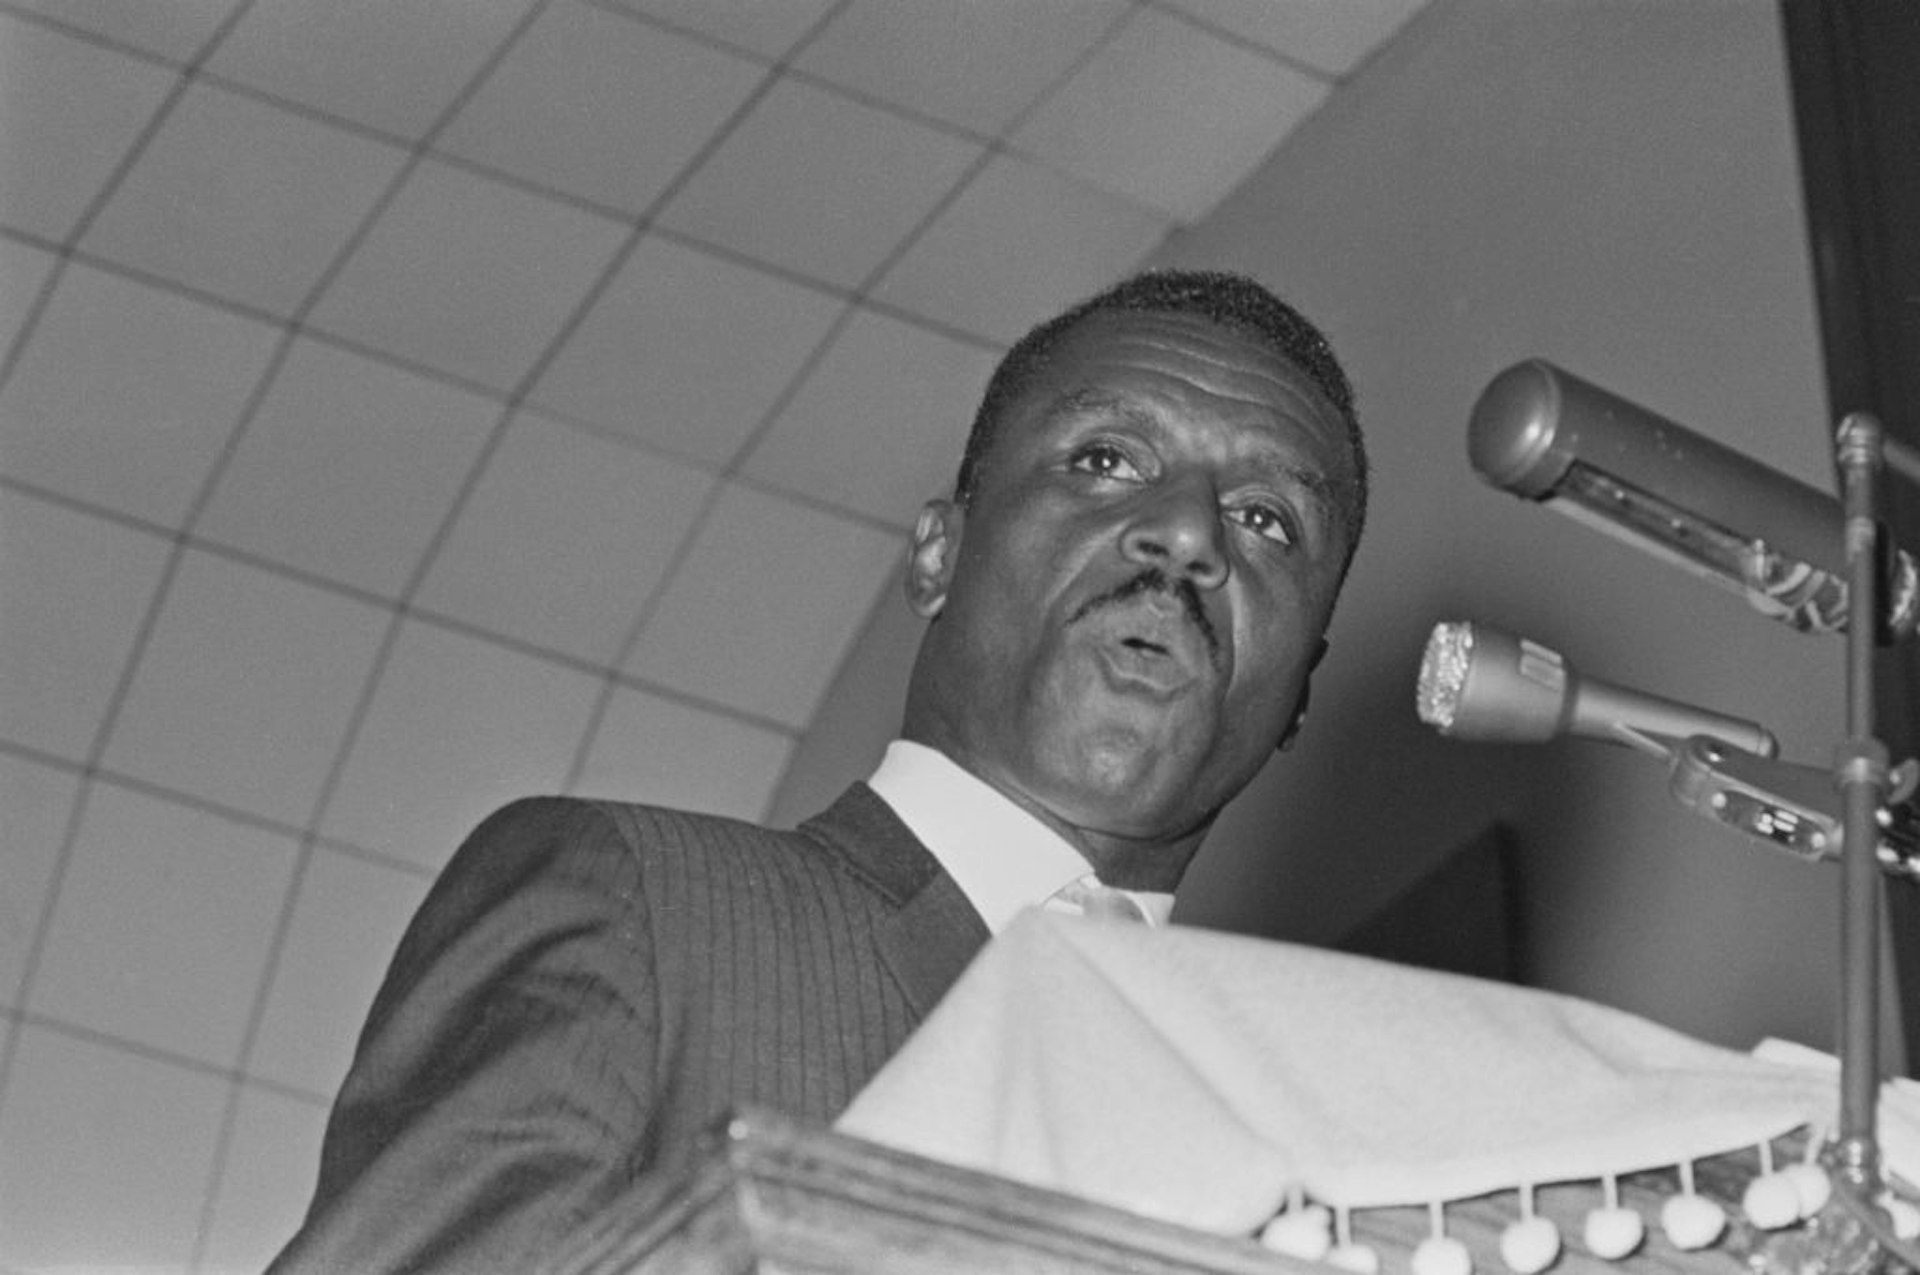 Reverend and Civil Rights leaders Fred L. Shuttlesworth speaks at a rally in his church in Birmingham